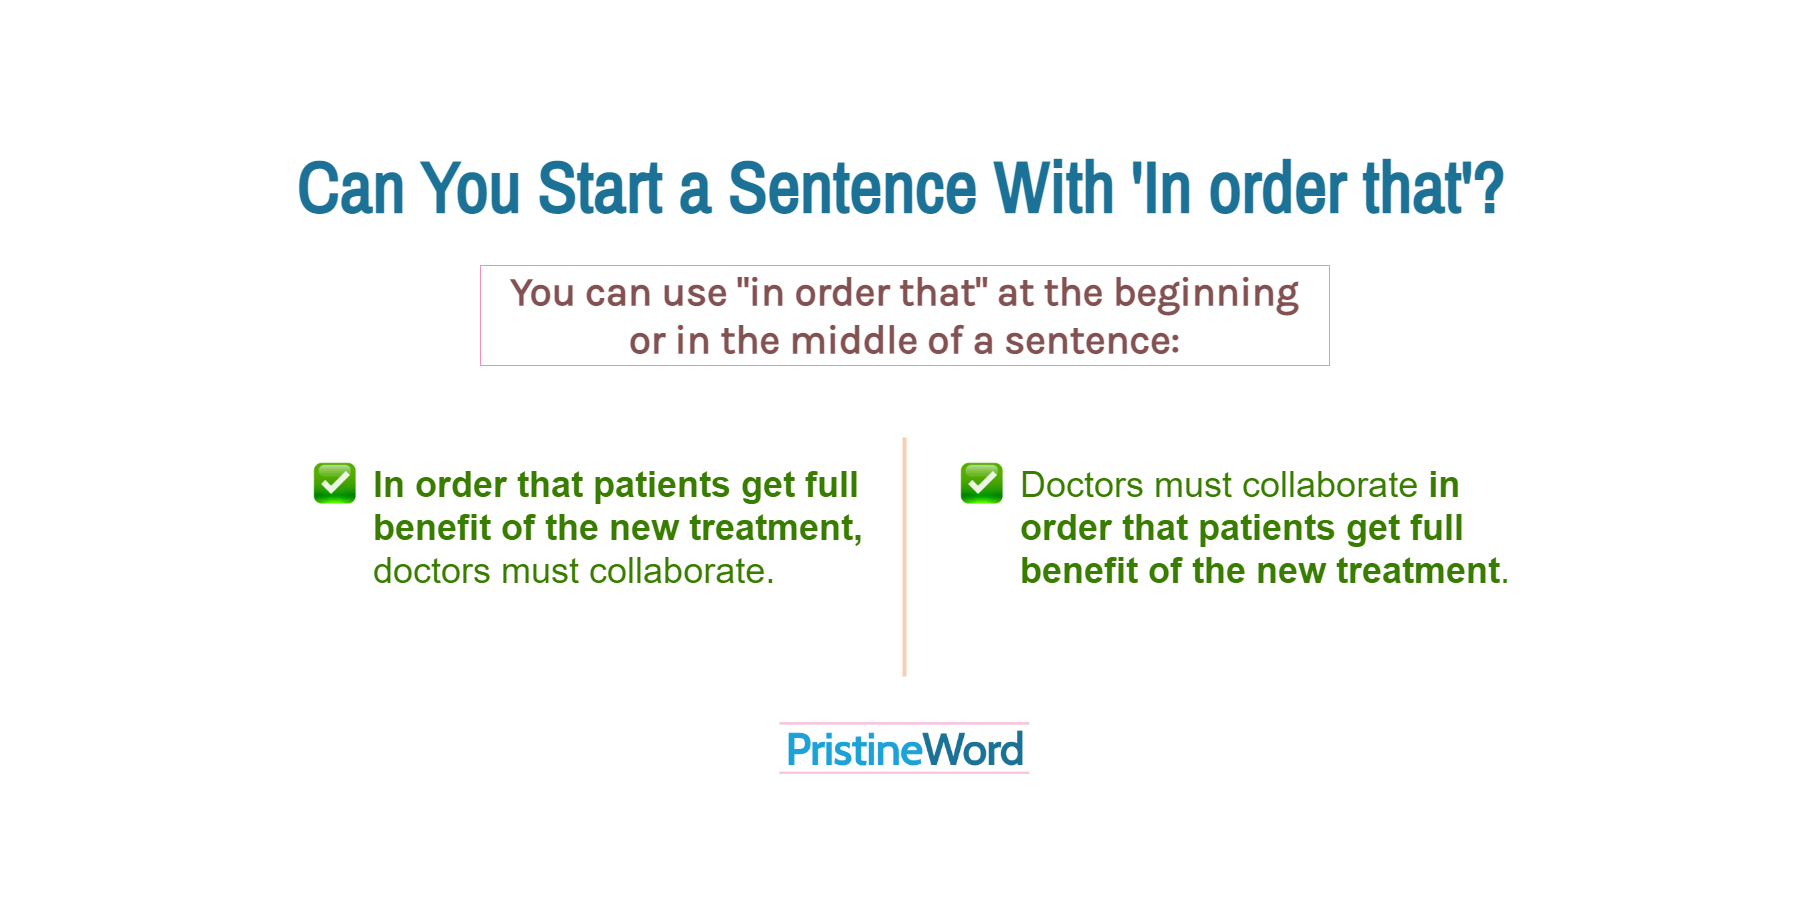 Can You Start a Sentence with 'In order that'?